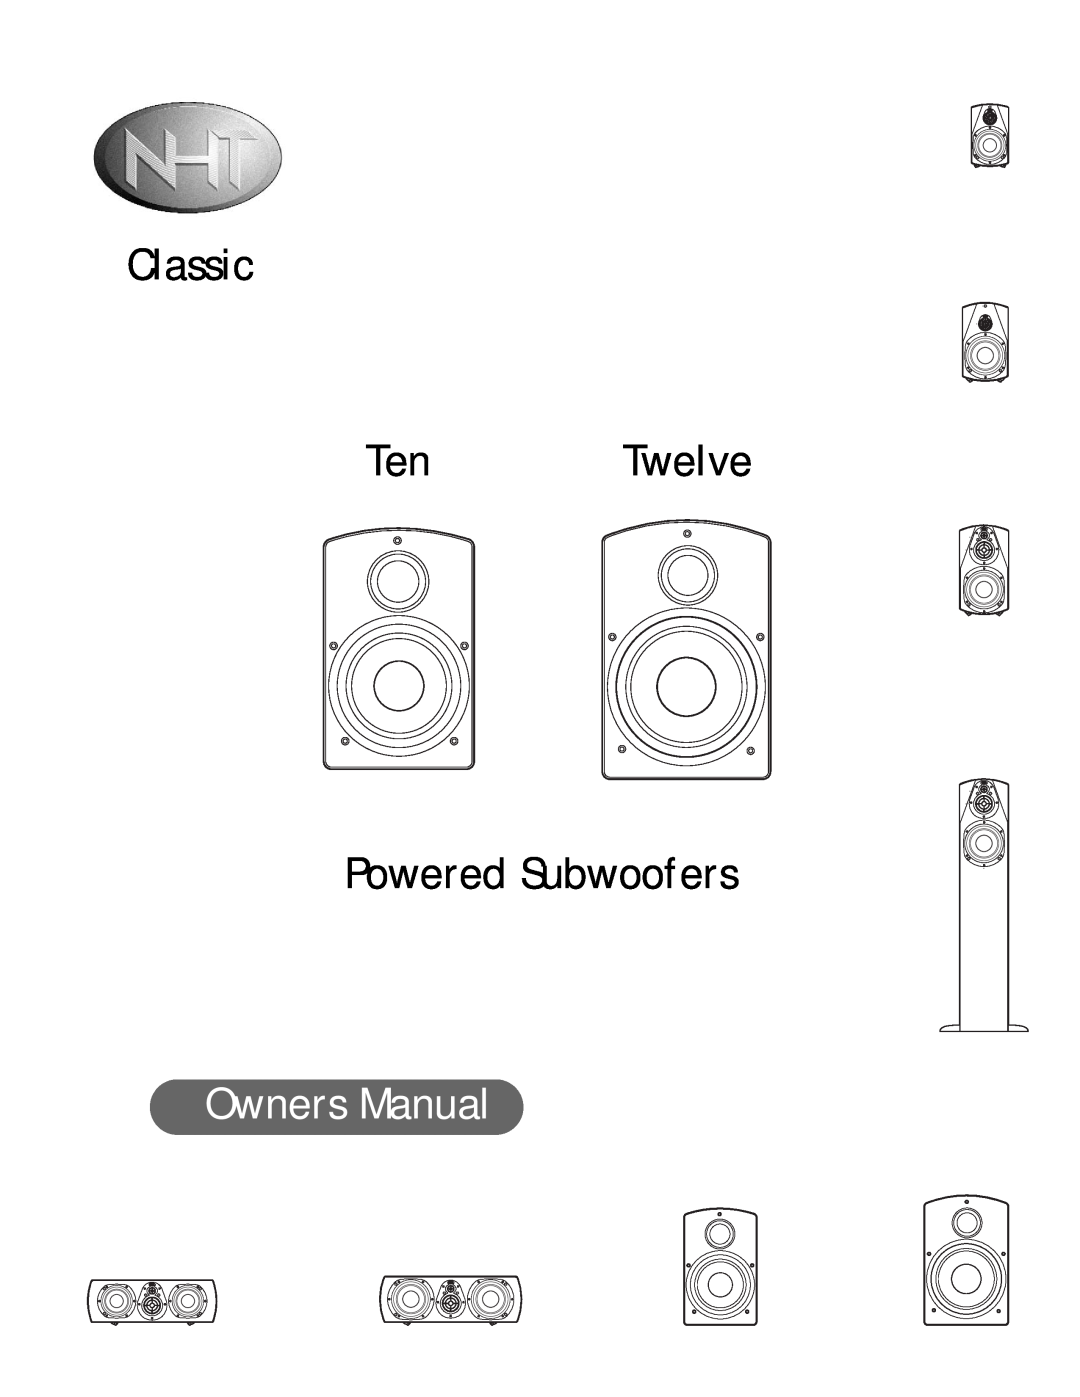 NHT owner manual Classic Ten Twelve Powered Subwoofers 